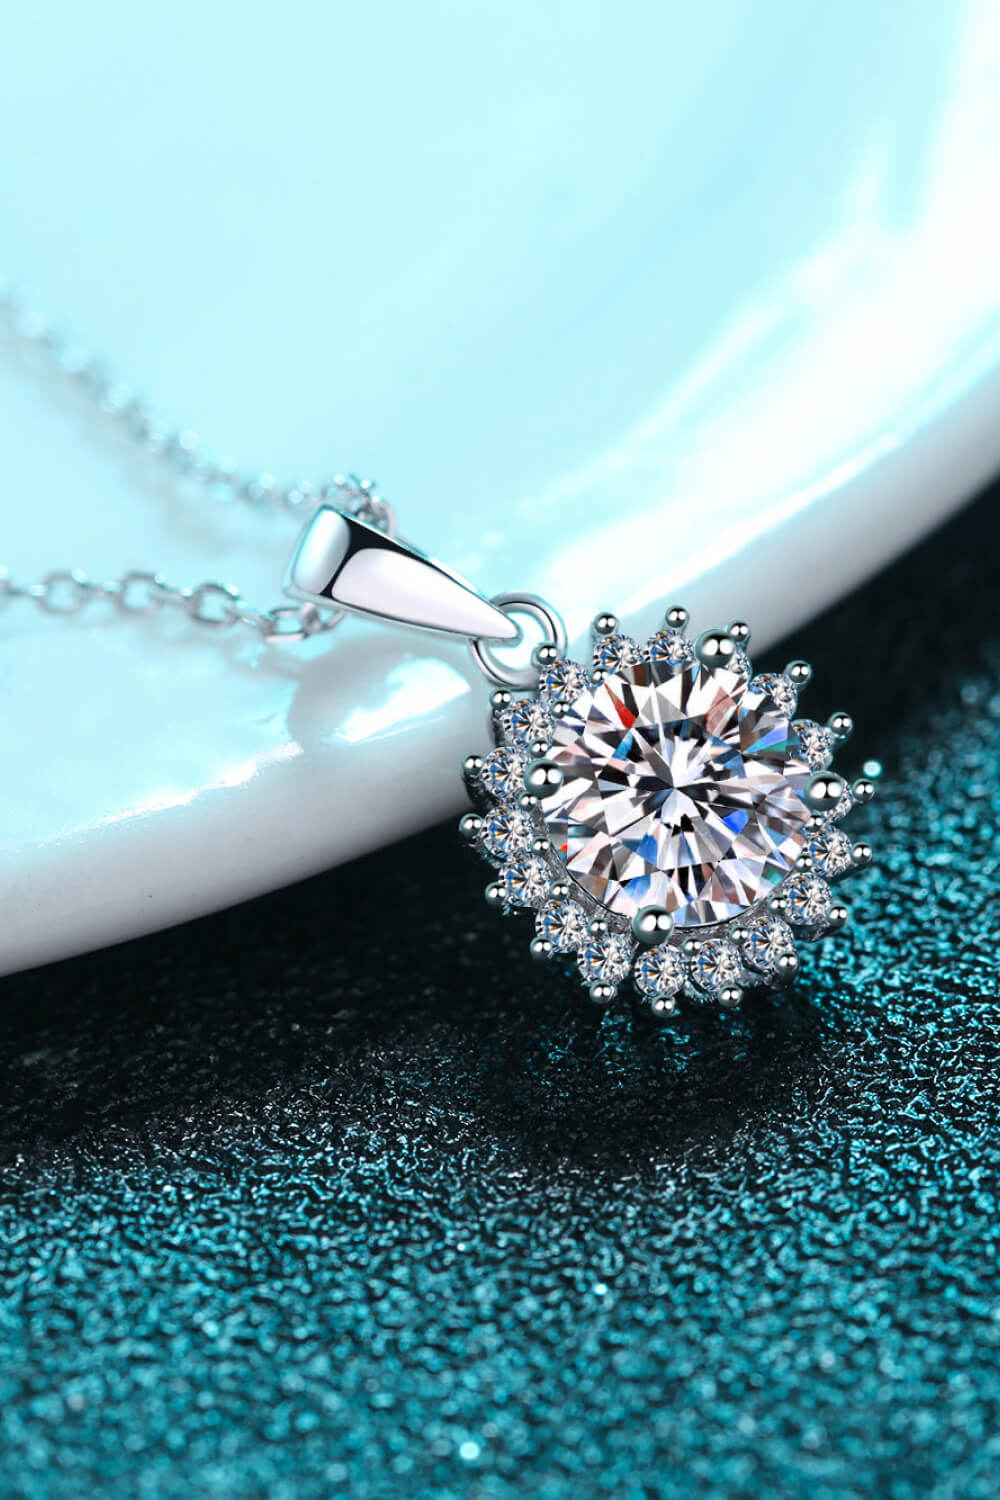 Jewelry 925 Sterling Silver Moissanite Pendant Necklace